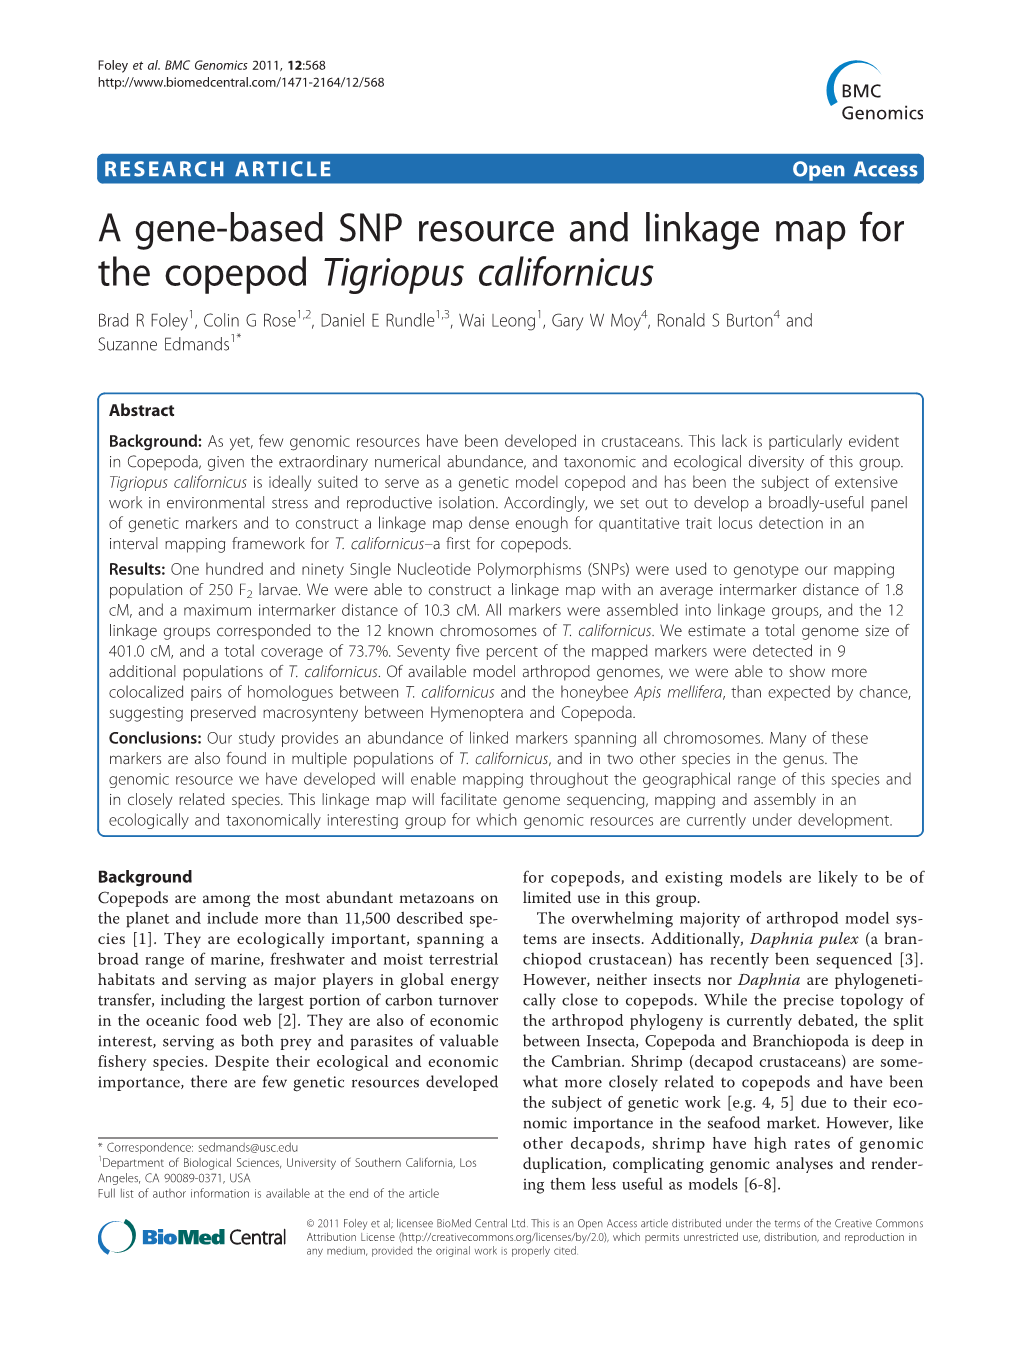 A Gene-Based SNP Resource and Linkage Map for the Copepod